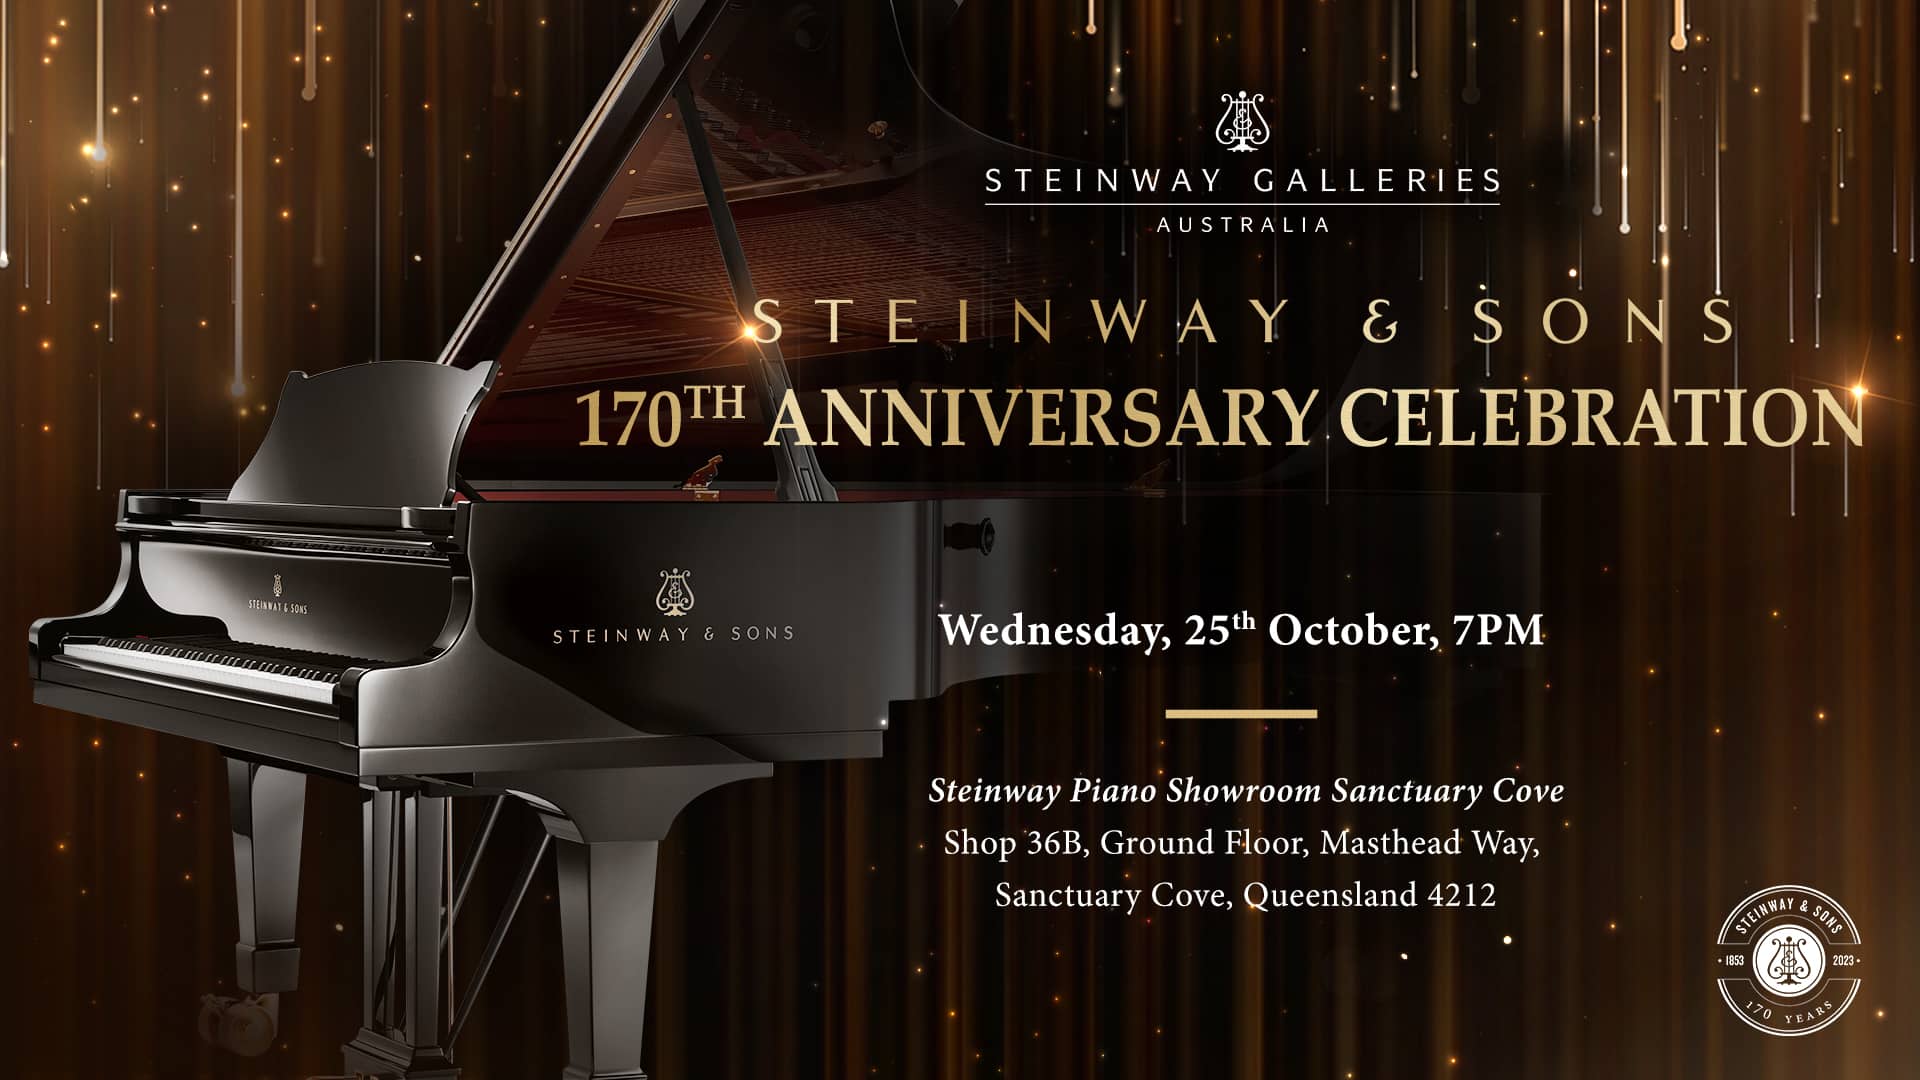 Steinway & Sons 170th Anniversary Celebration Event at Steinway Piano Showroom Sanctuary Cove